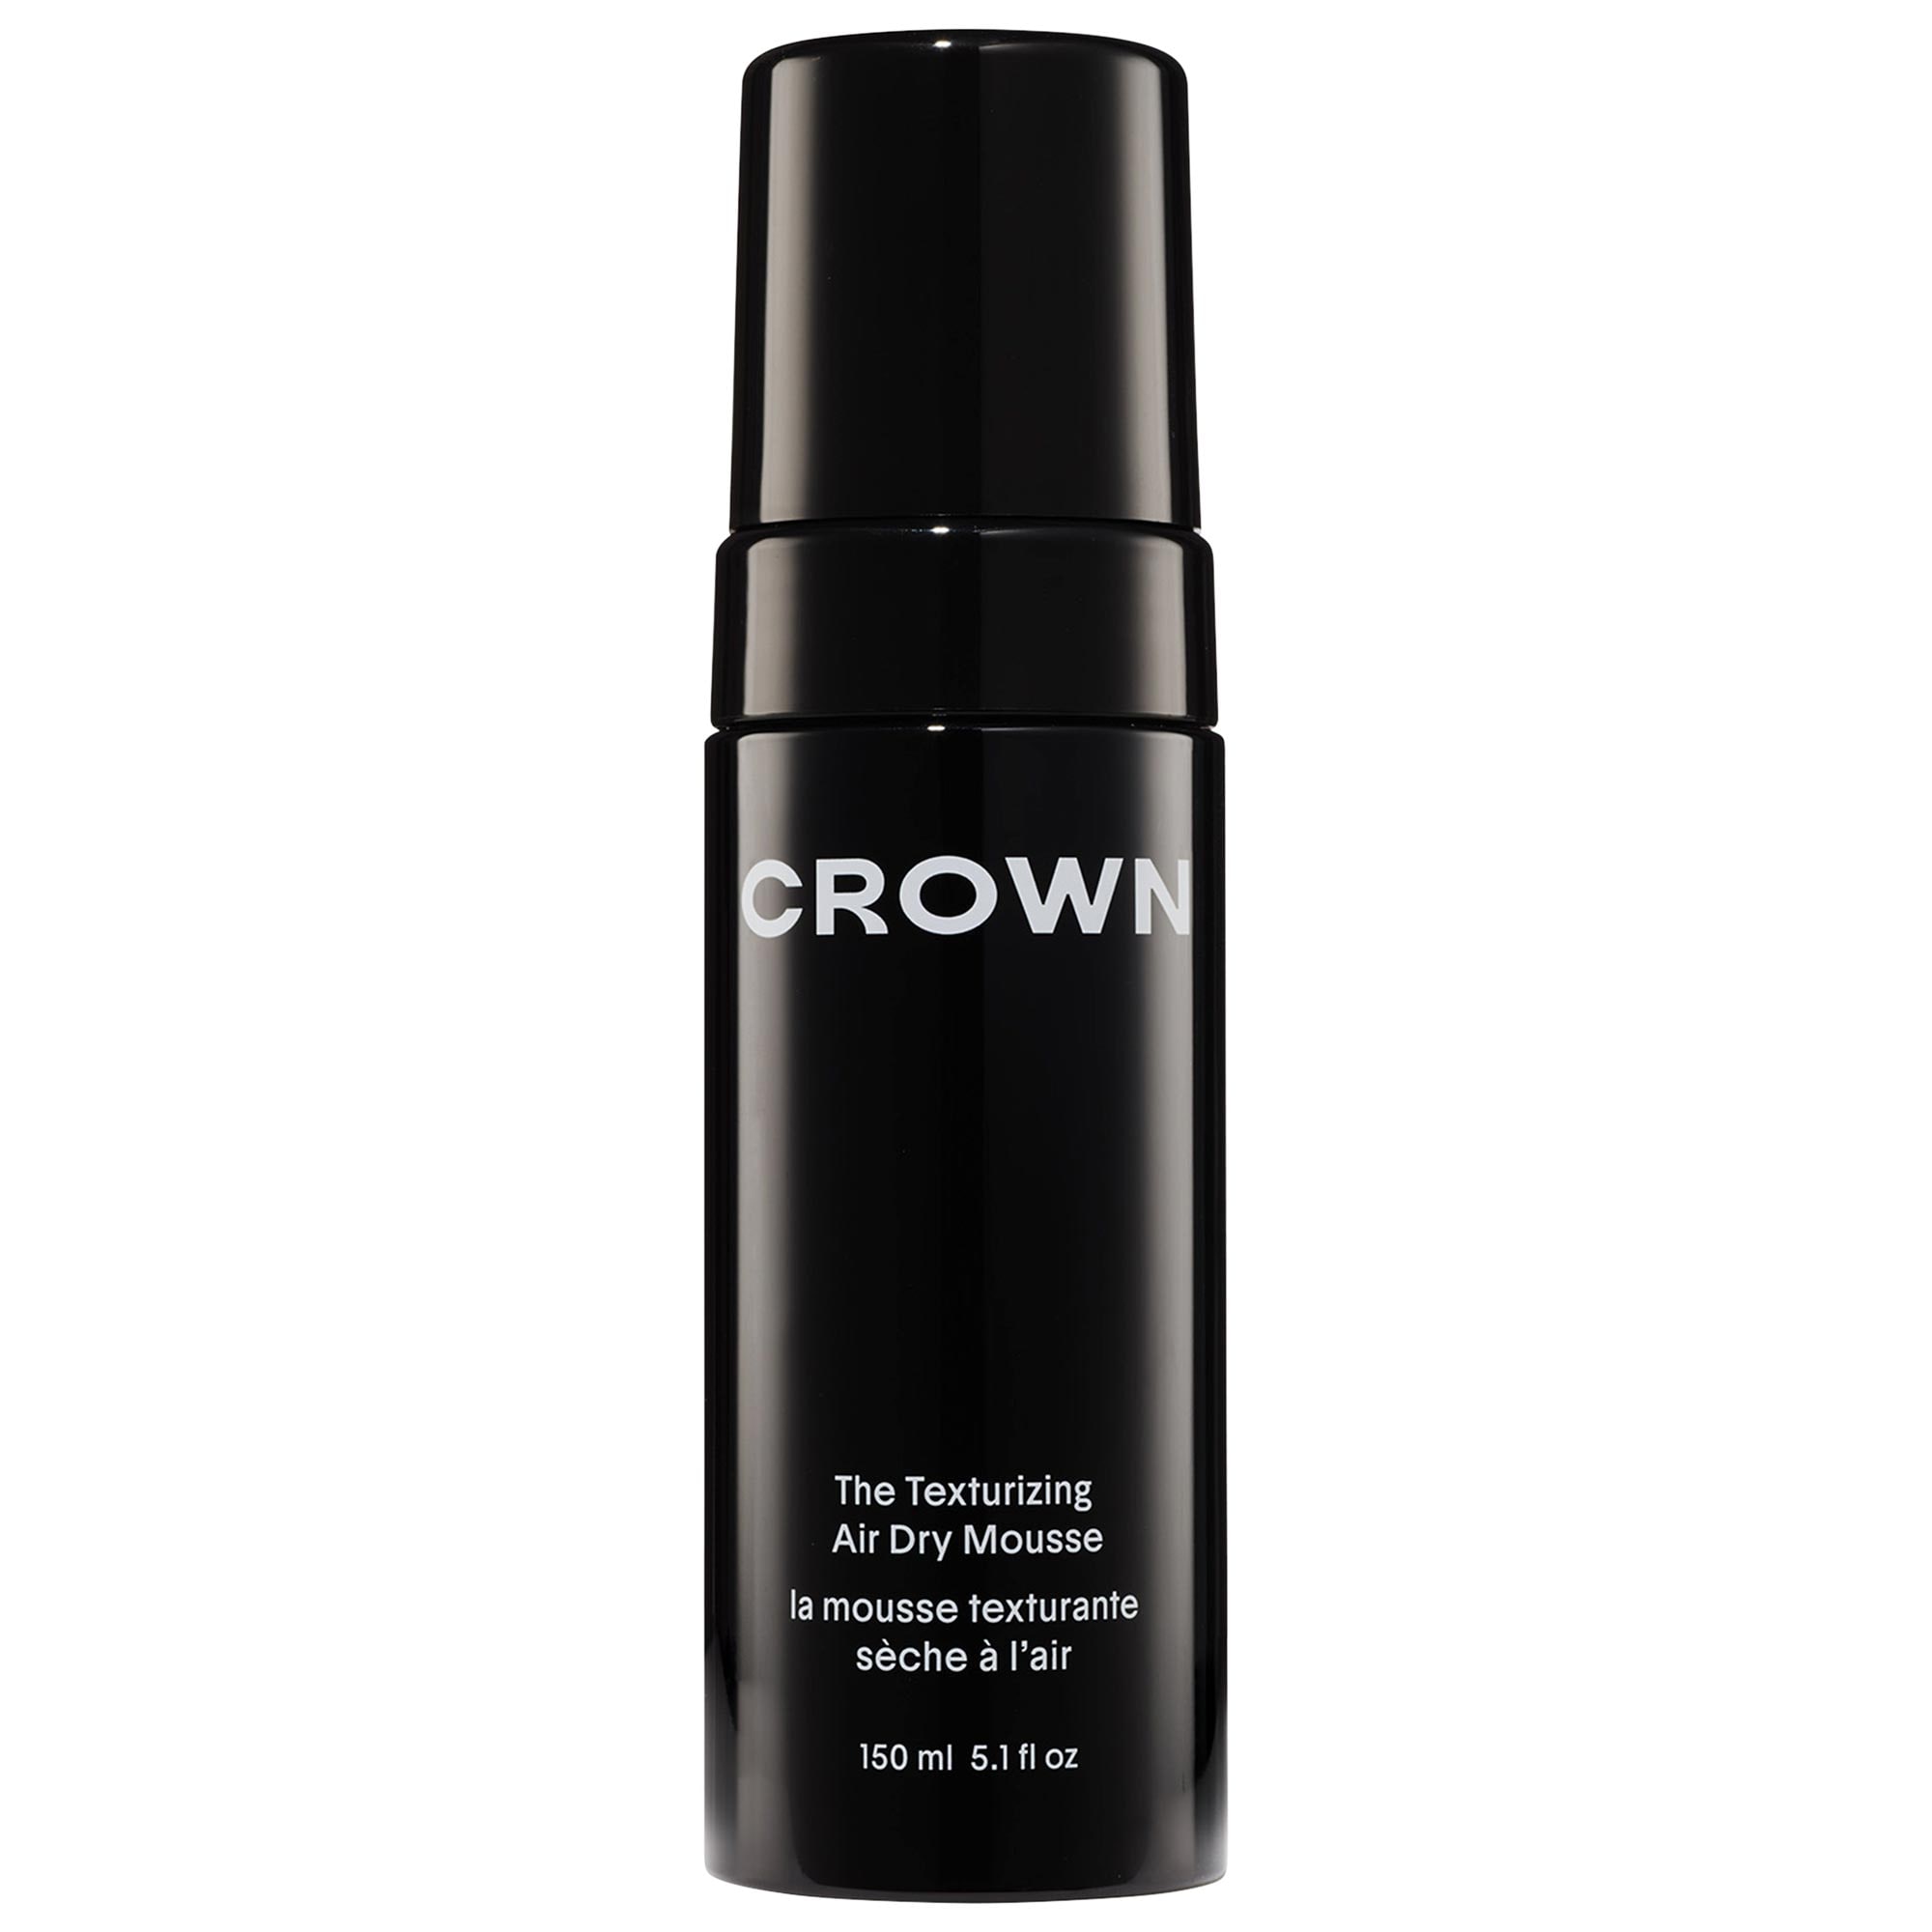 The Texturizing Air Dry Hair Mousse